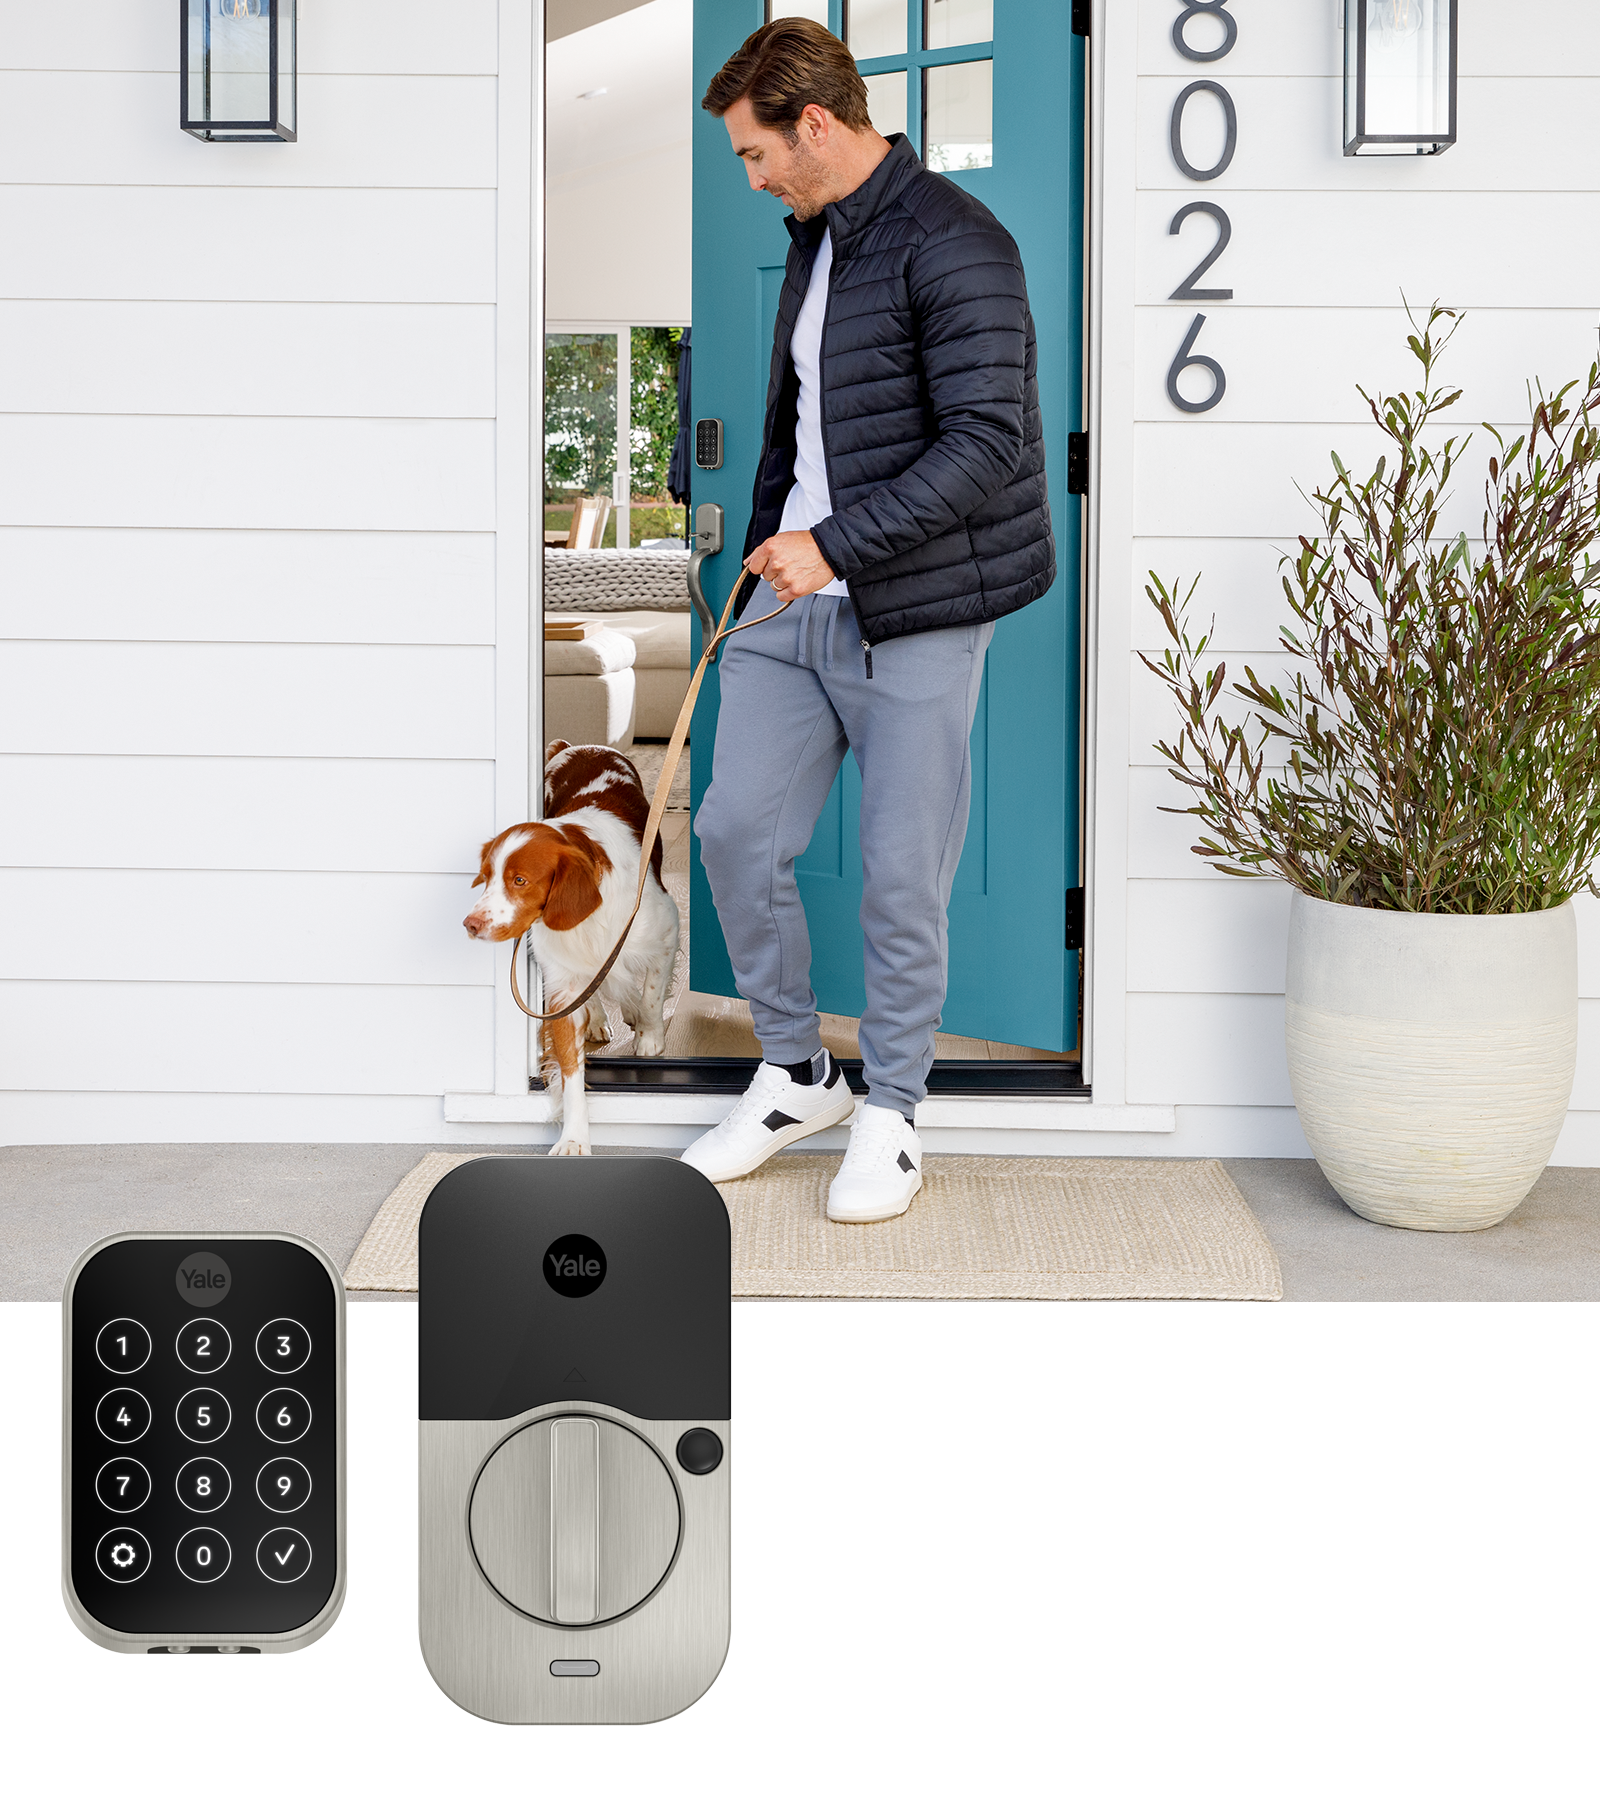 Yale Assure Lock 2 Key-Free Touchscreen with Wi-Fi in Satin Nickel